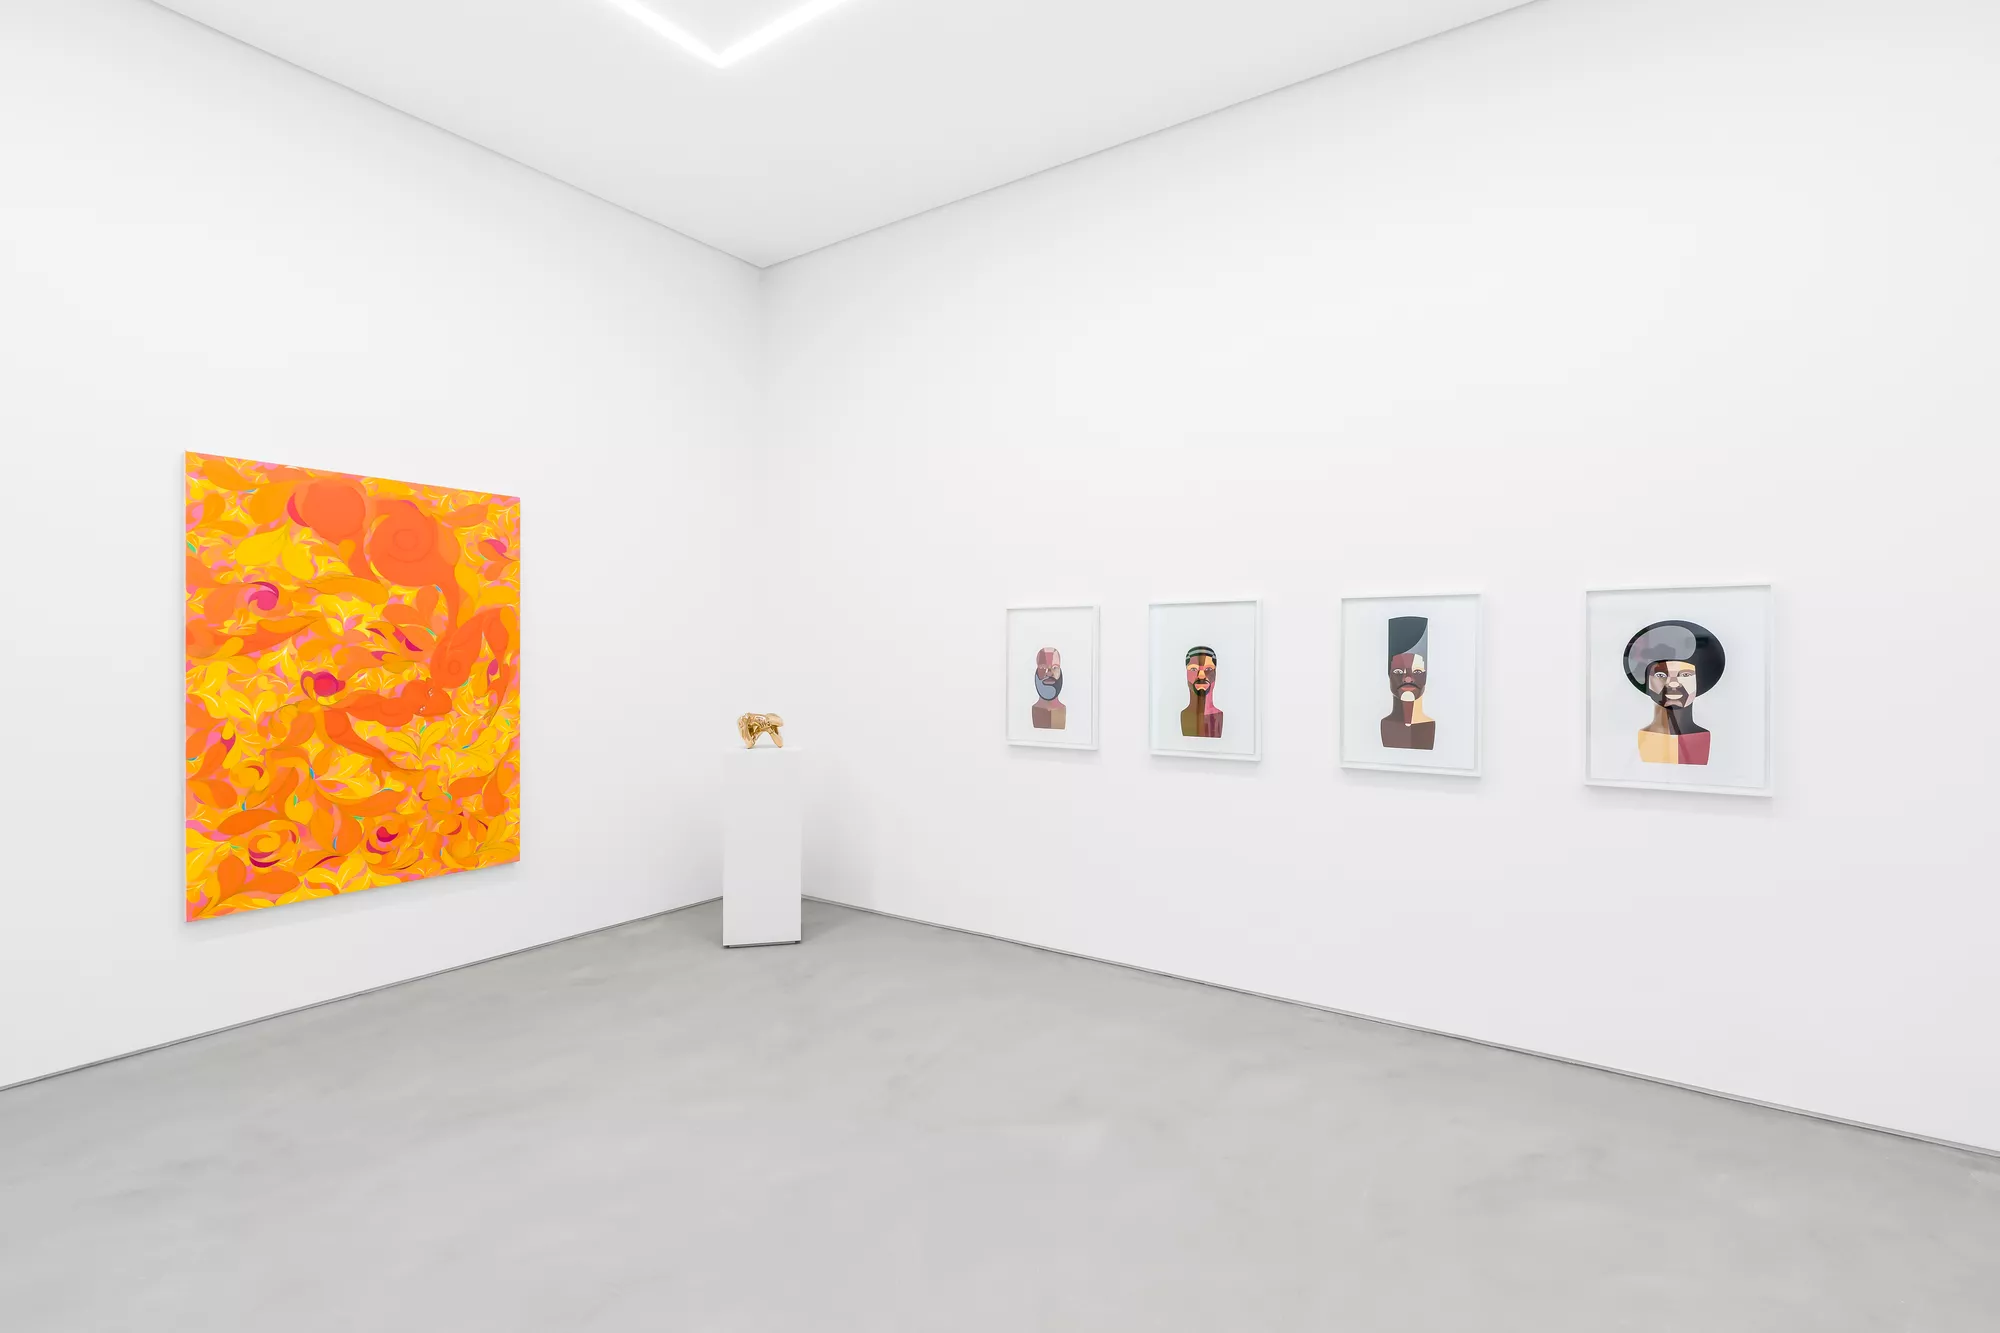 Installation view of works by Tunji Adeniyi-Jones, Hank Willis Thomas, and Derrick Adams in “The Speed of Grace,” curated by Larry Ossei-Mensah, at Simões de Ass